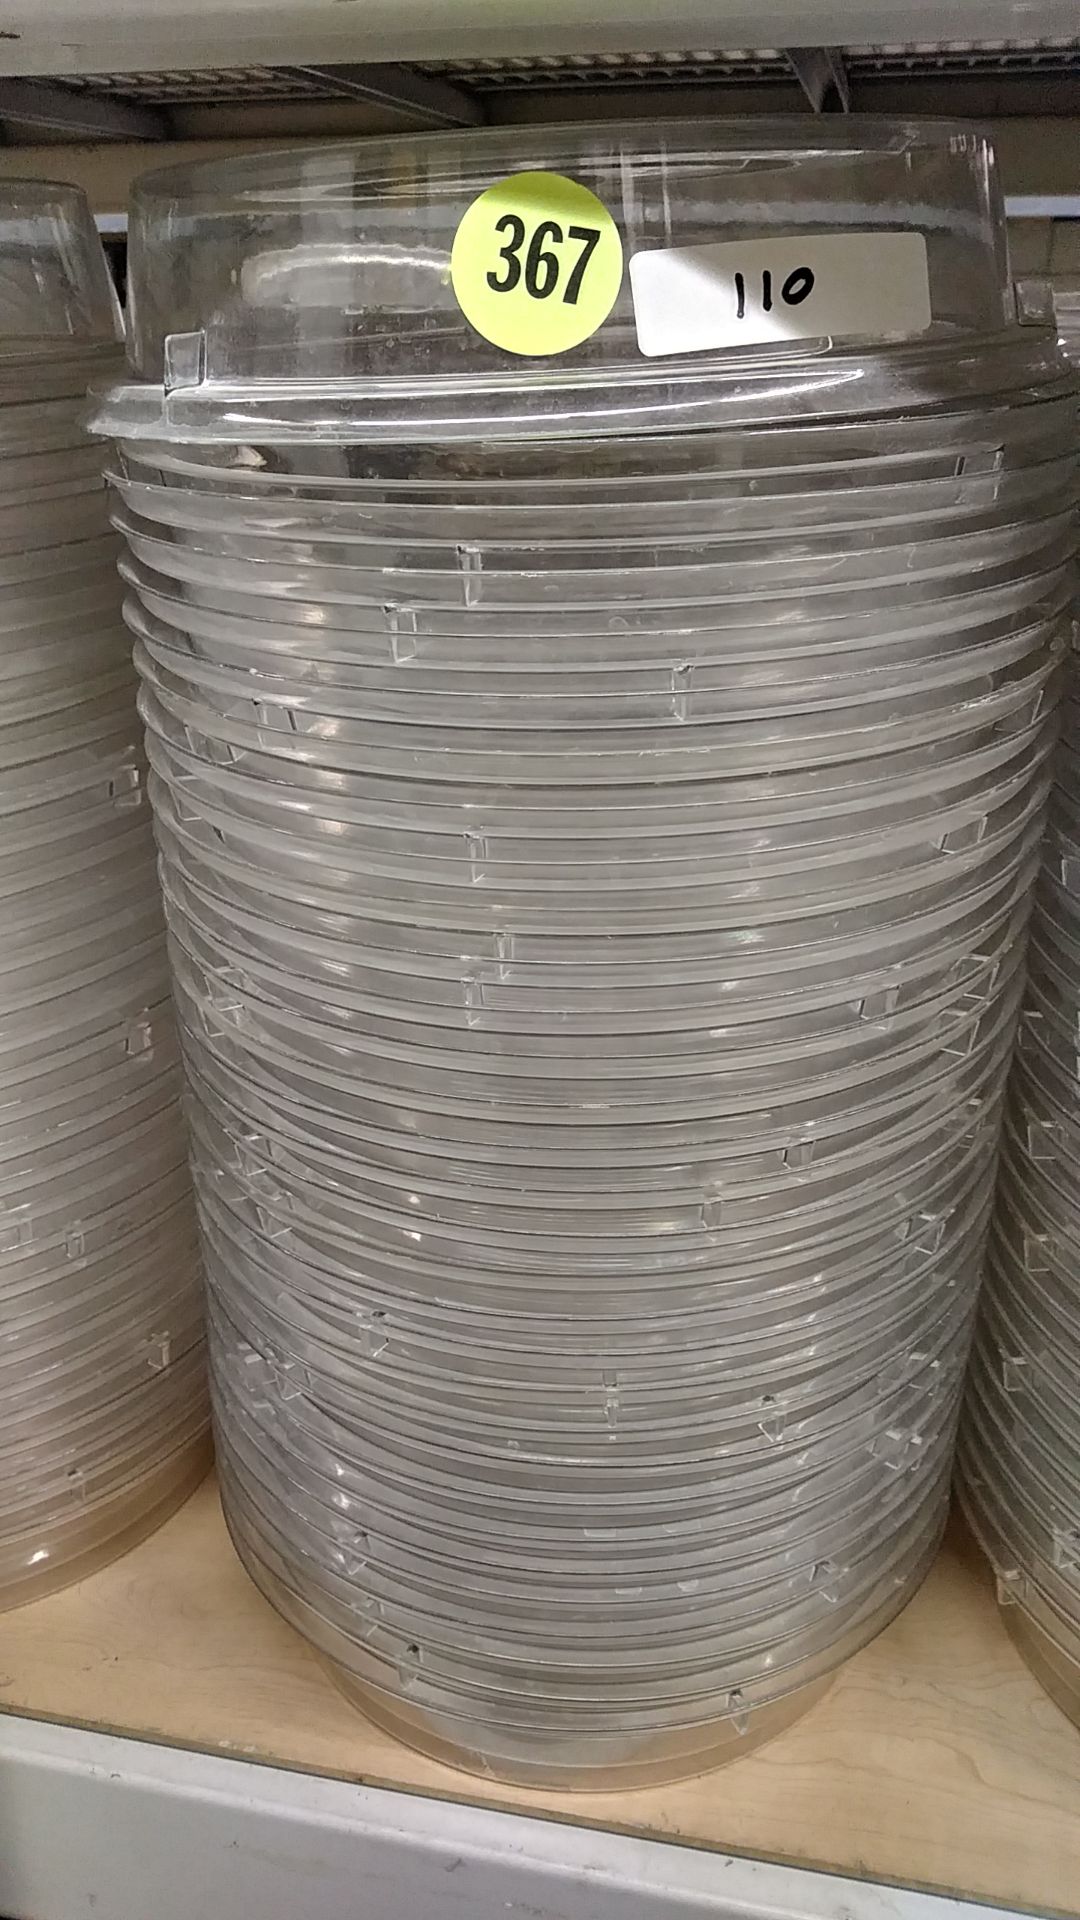 12" PLASTIC PLATE COVERS (including QTY 110) - Image 3 of 3